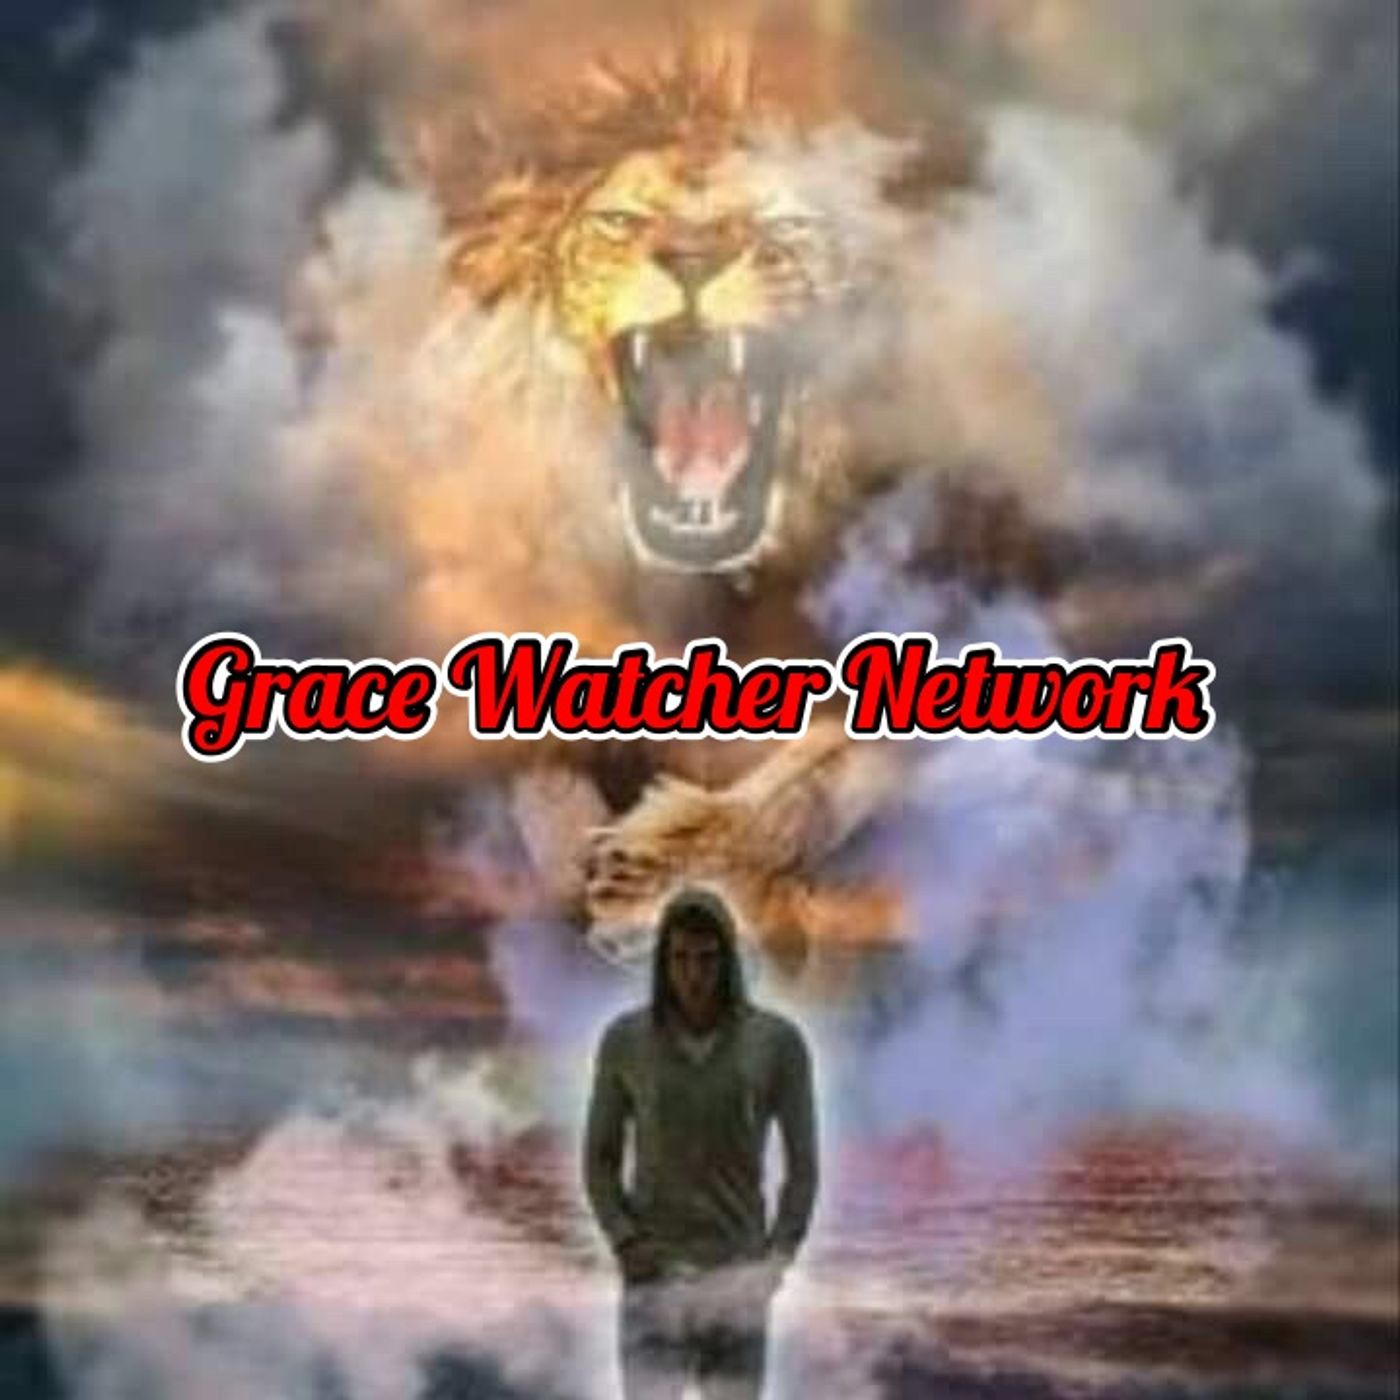 The Grace Watcher Report - Dealing with Control, Manipulation and the Coming Shift